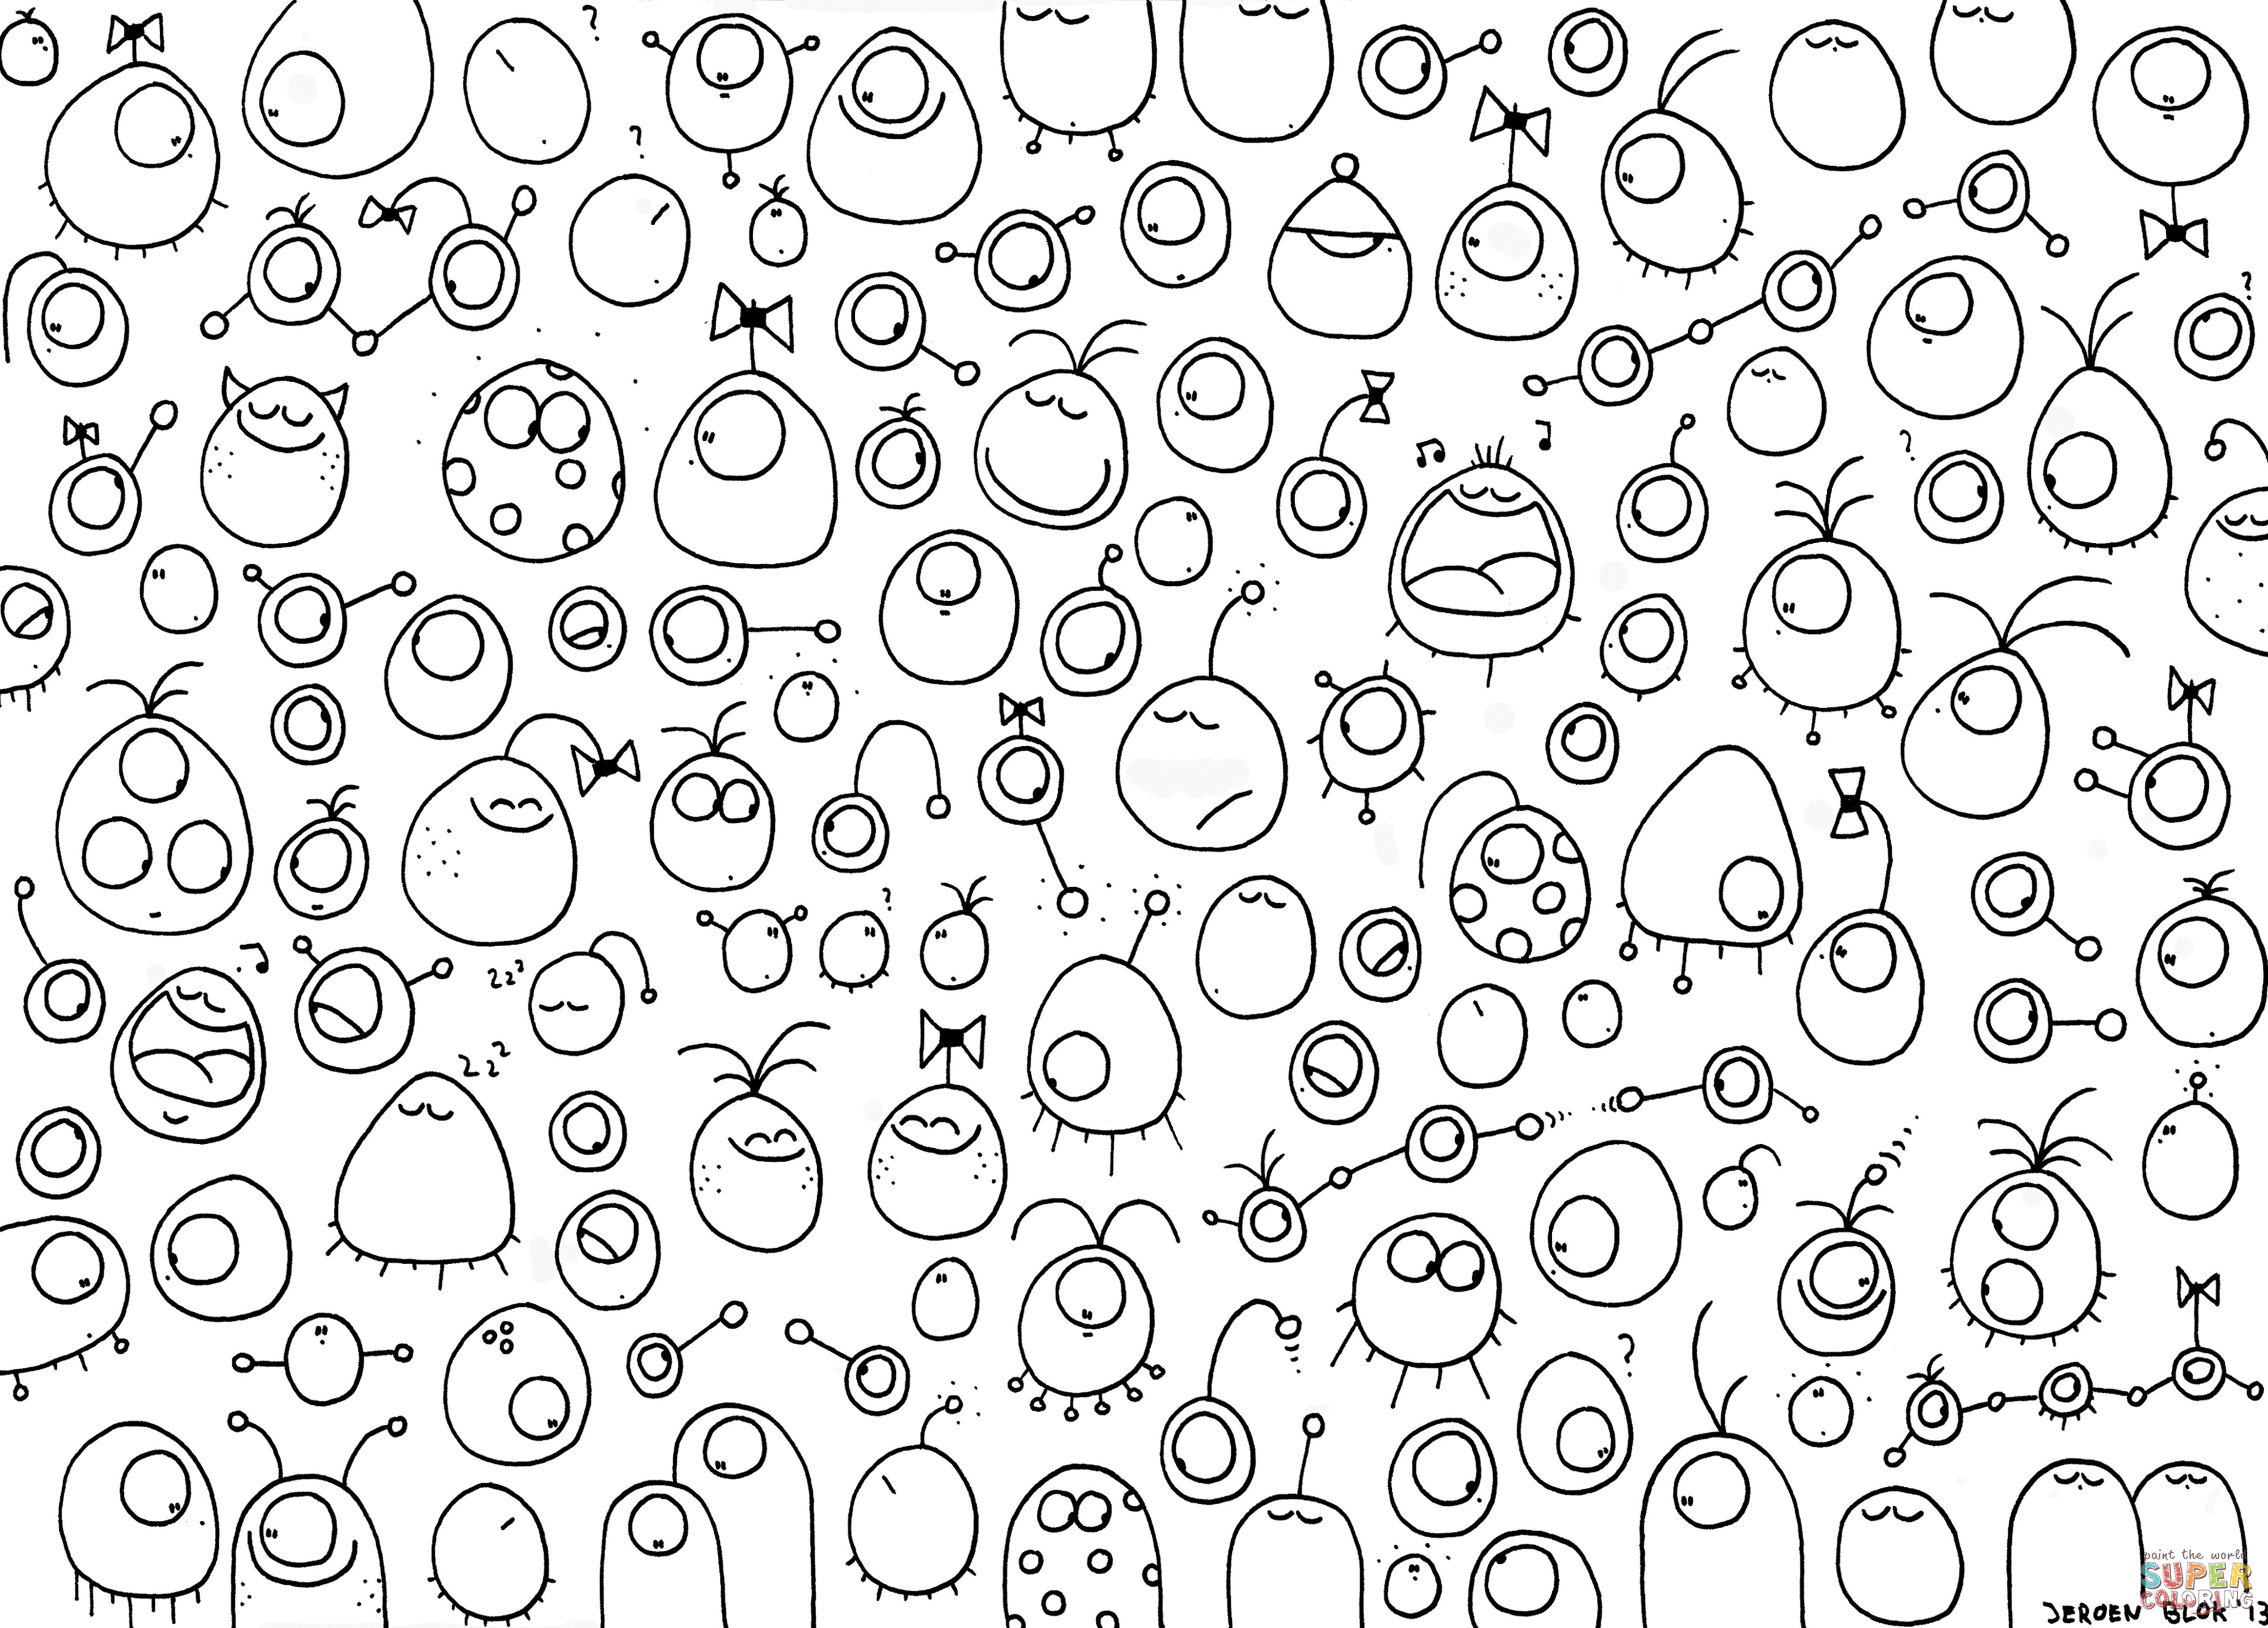 Diversity munnen by jompie coloring page free printable coloring pages